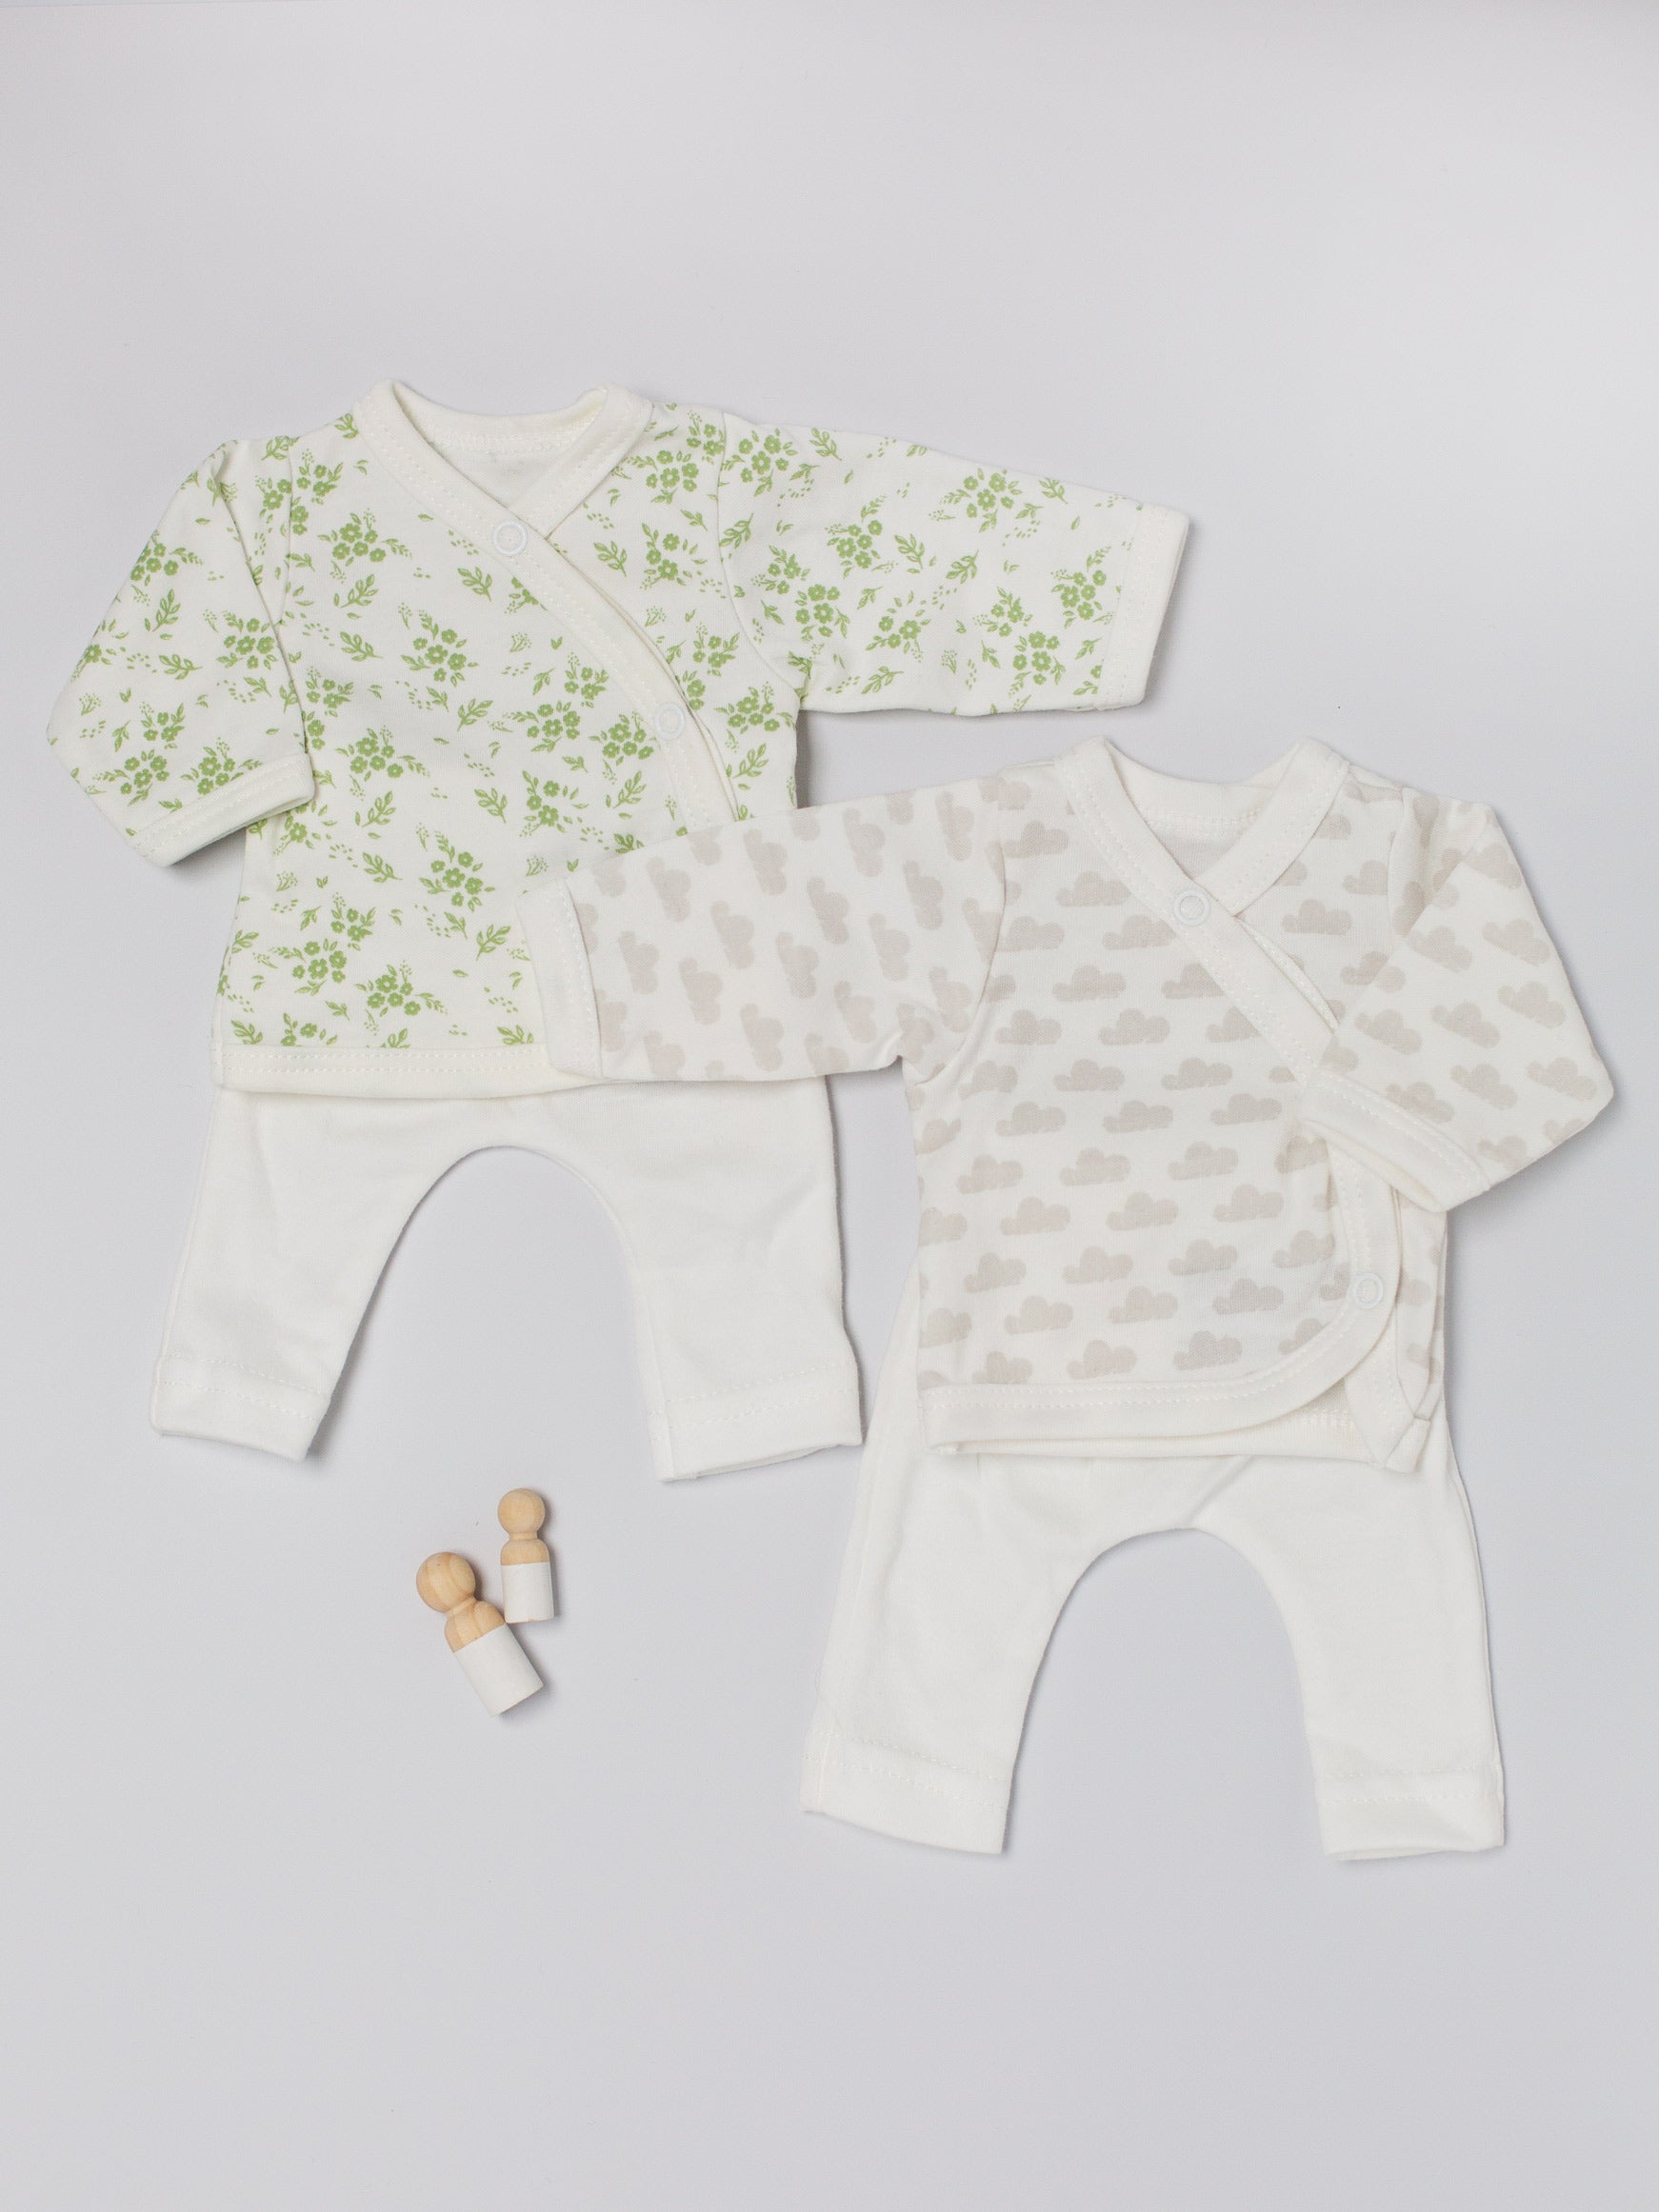 Twin Girl & Boy Bundle - 2 piece sets in Apple Floral & Silver Cloud Print, Organic Cotton Set/Multipack Tiny & Small 